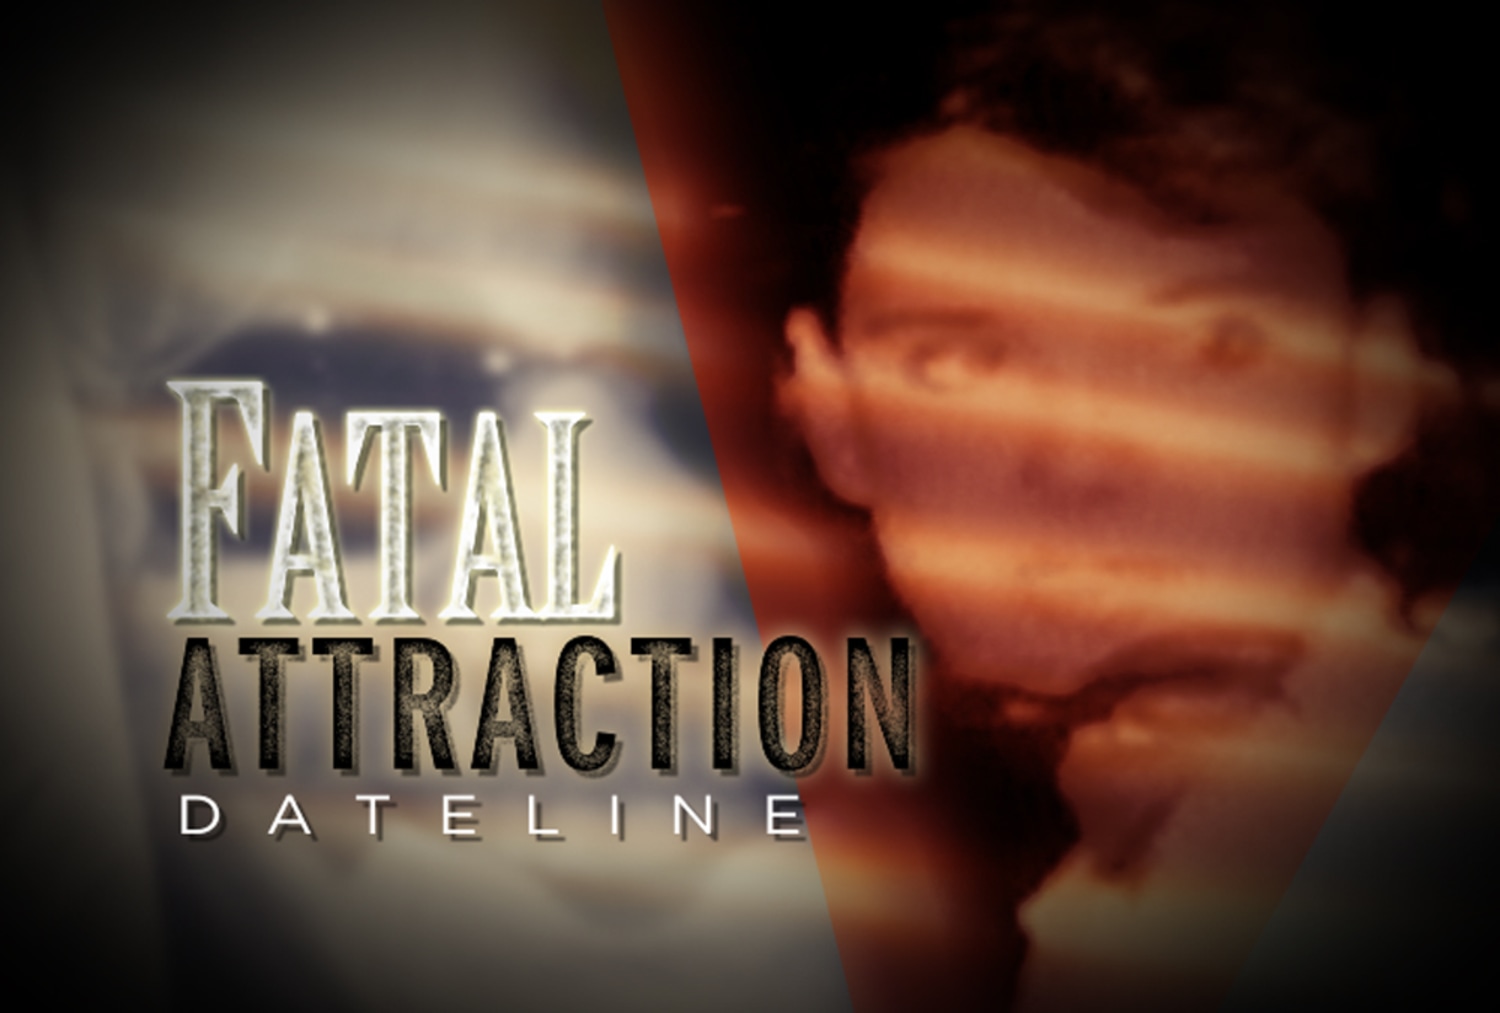 Fatal attraction